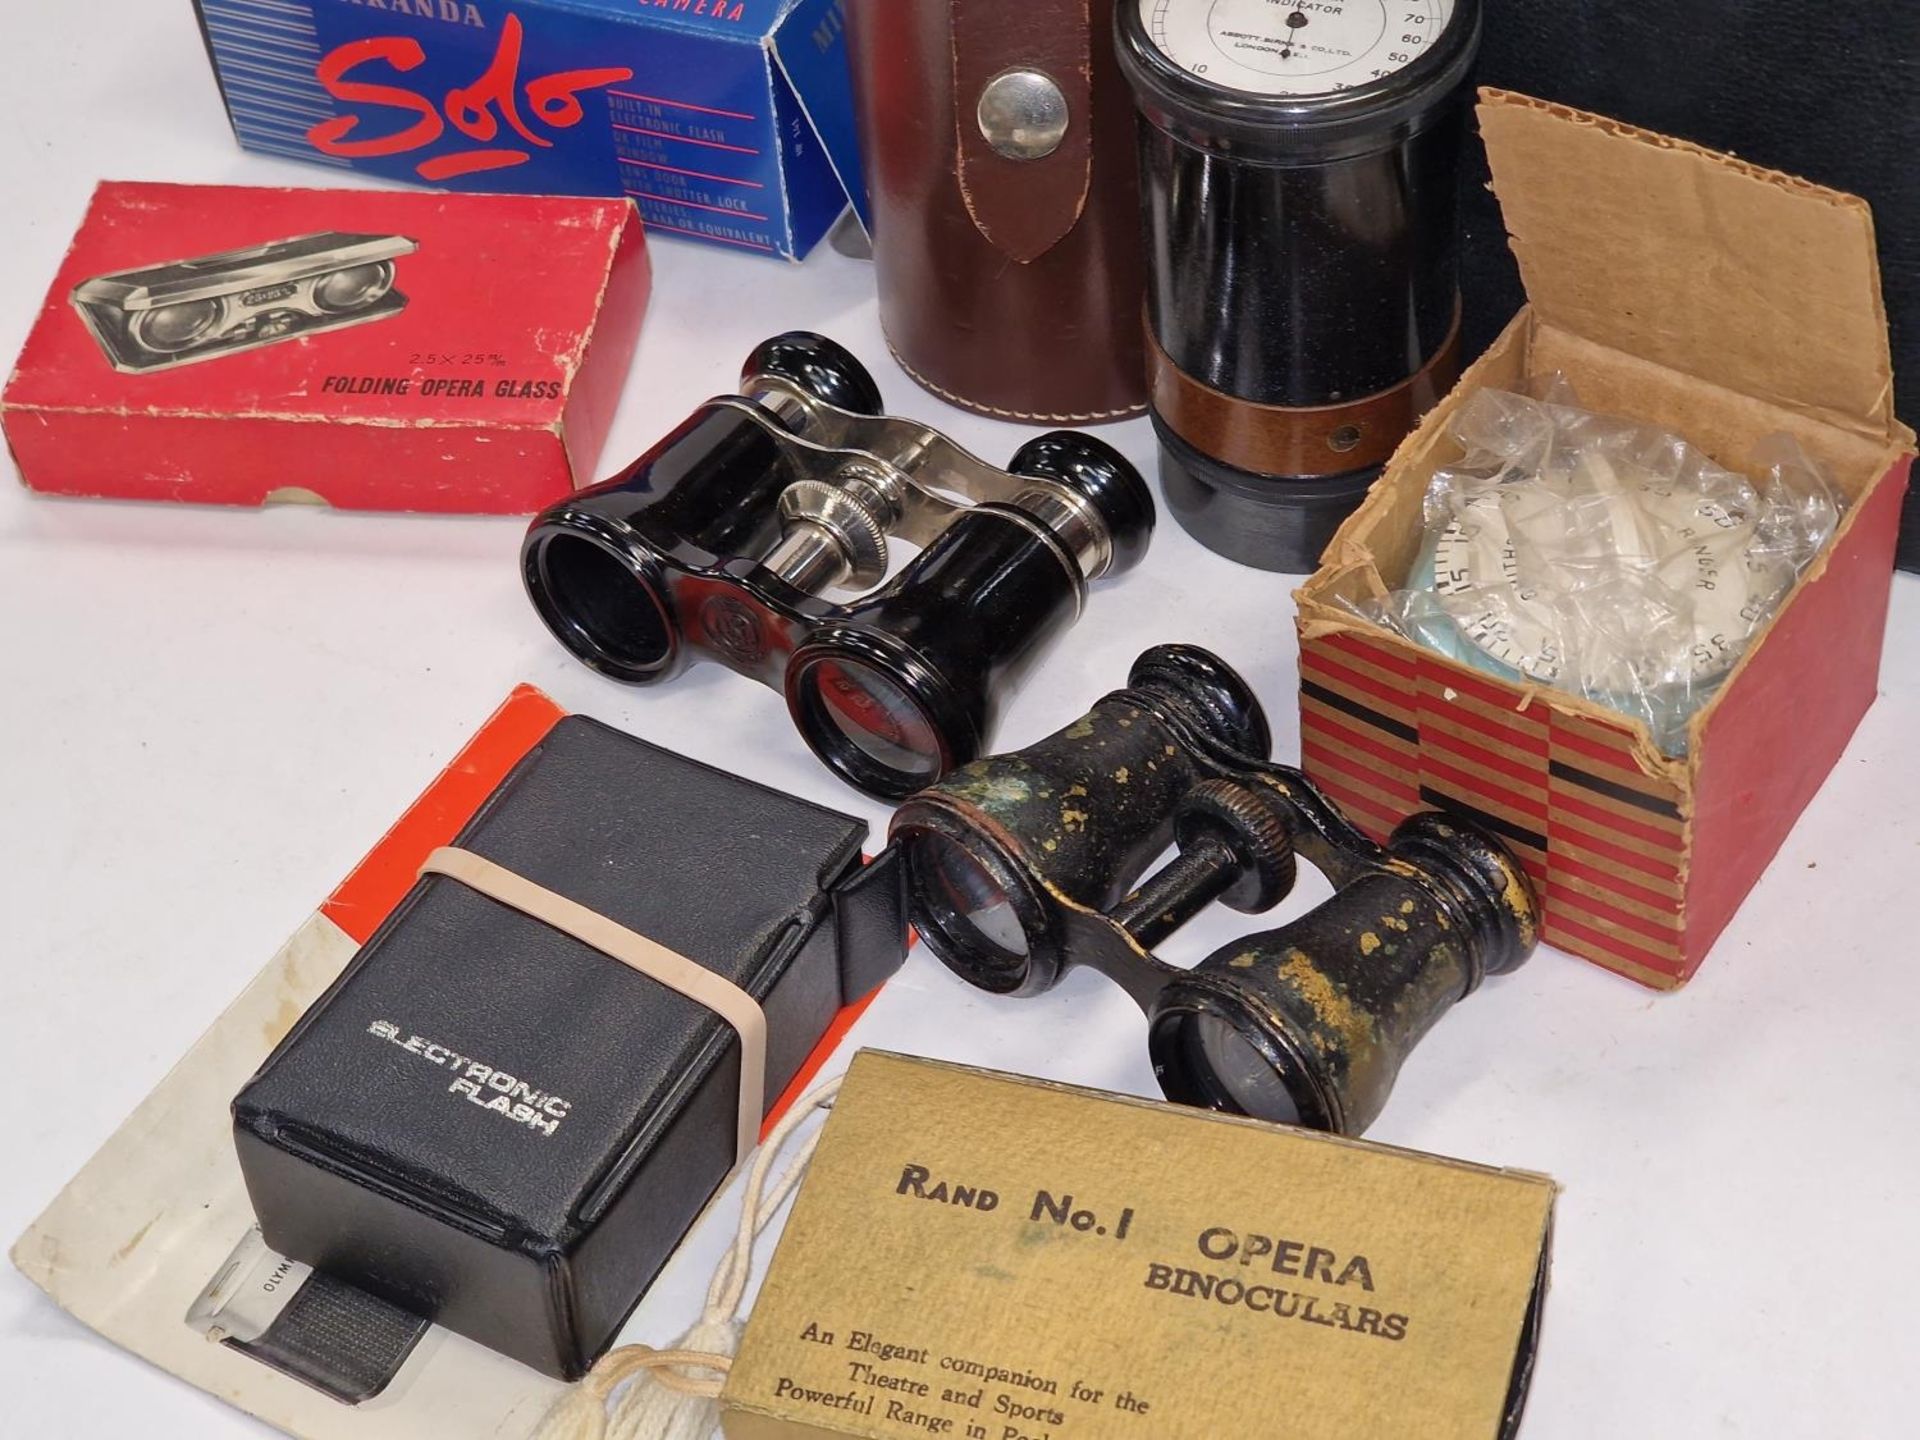 Mixed lot to include binoculars, Opera glasses, camera related items etc. - Image 2 of 3